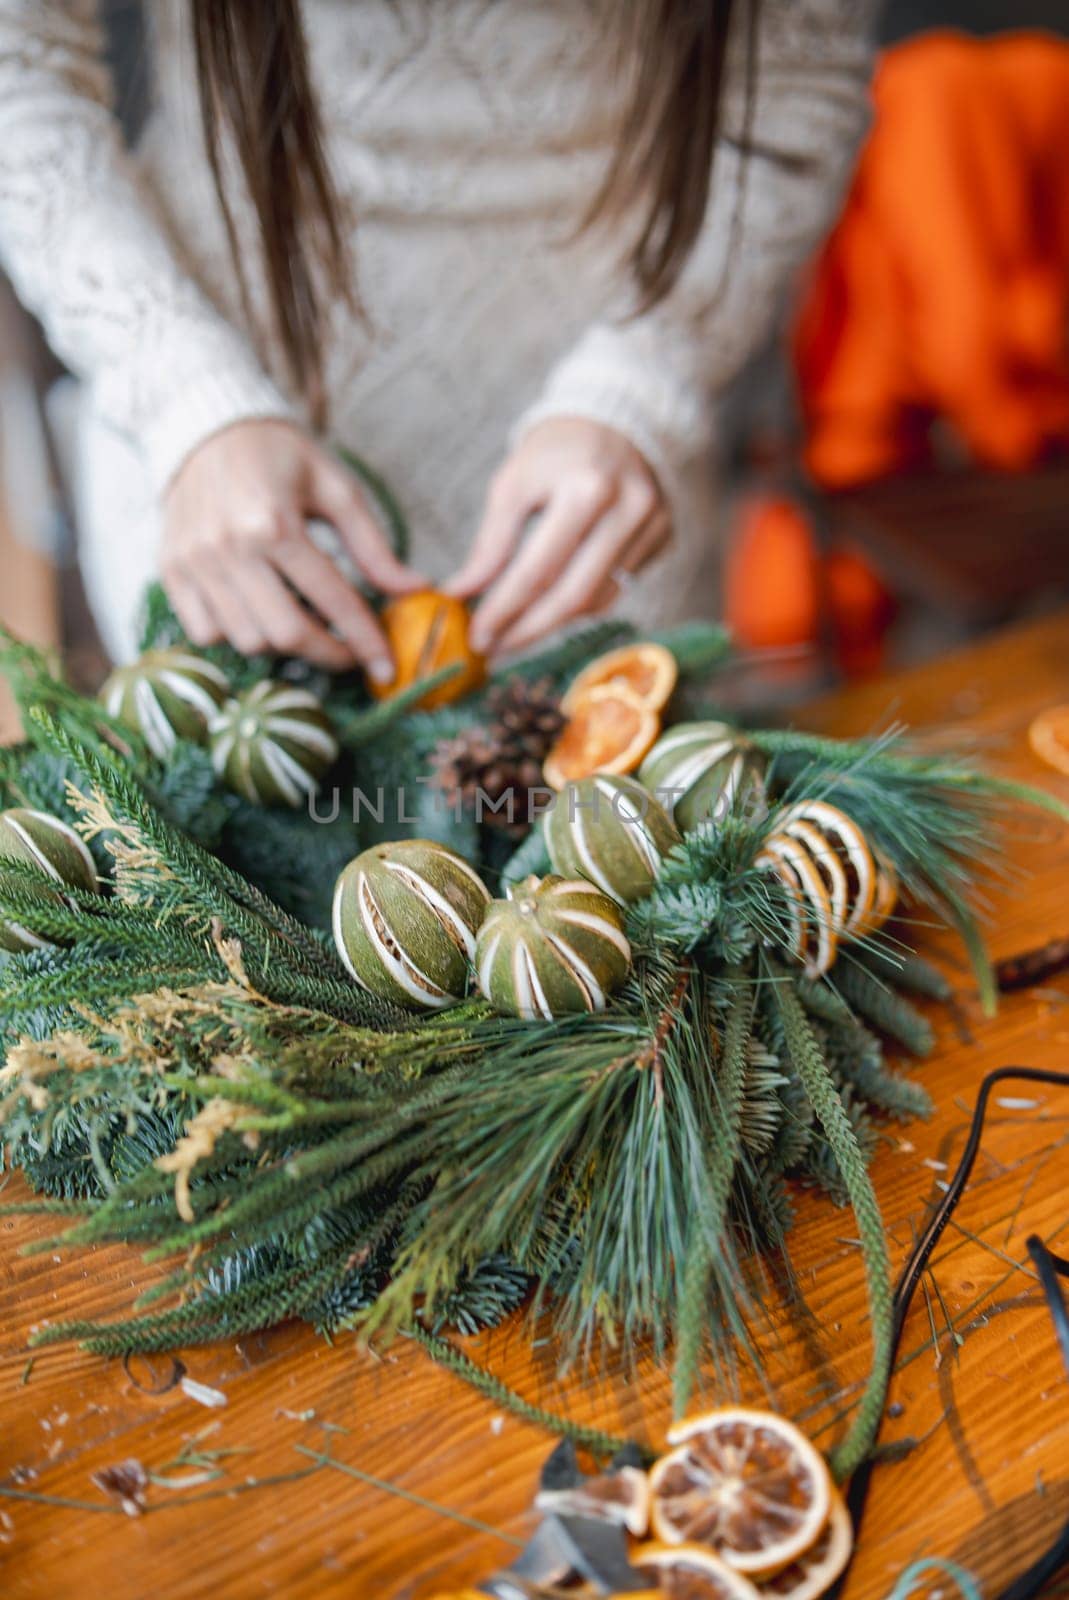 An enchanting young woman deeply involved in a Christmas decor DIY session. High quality photo